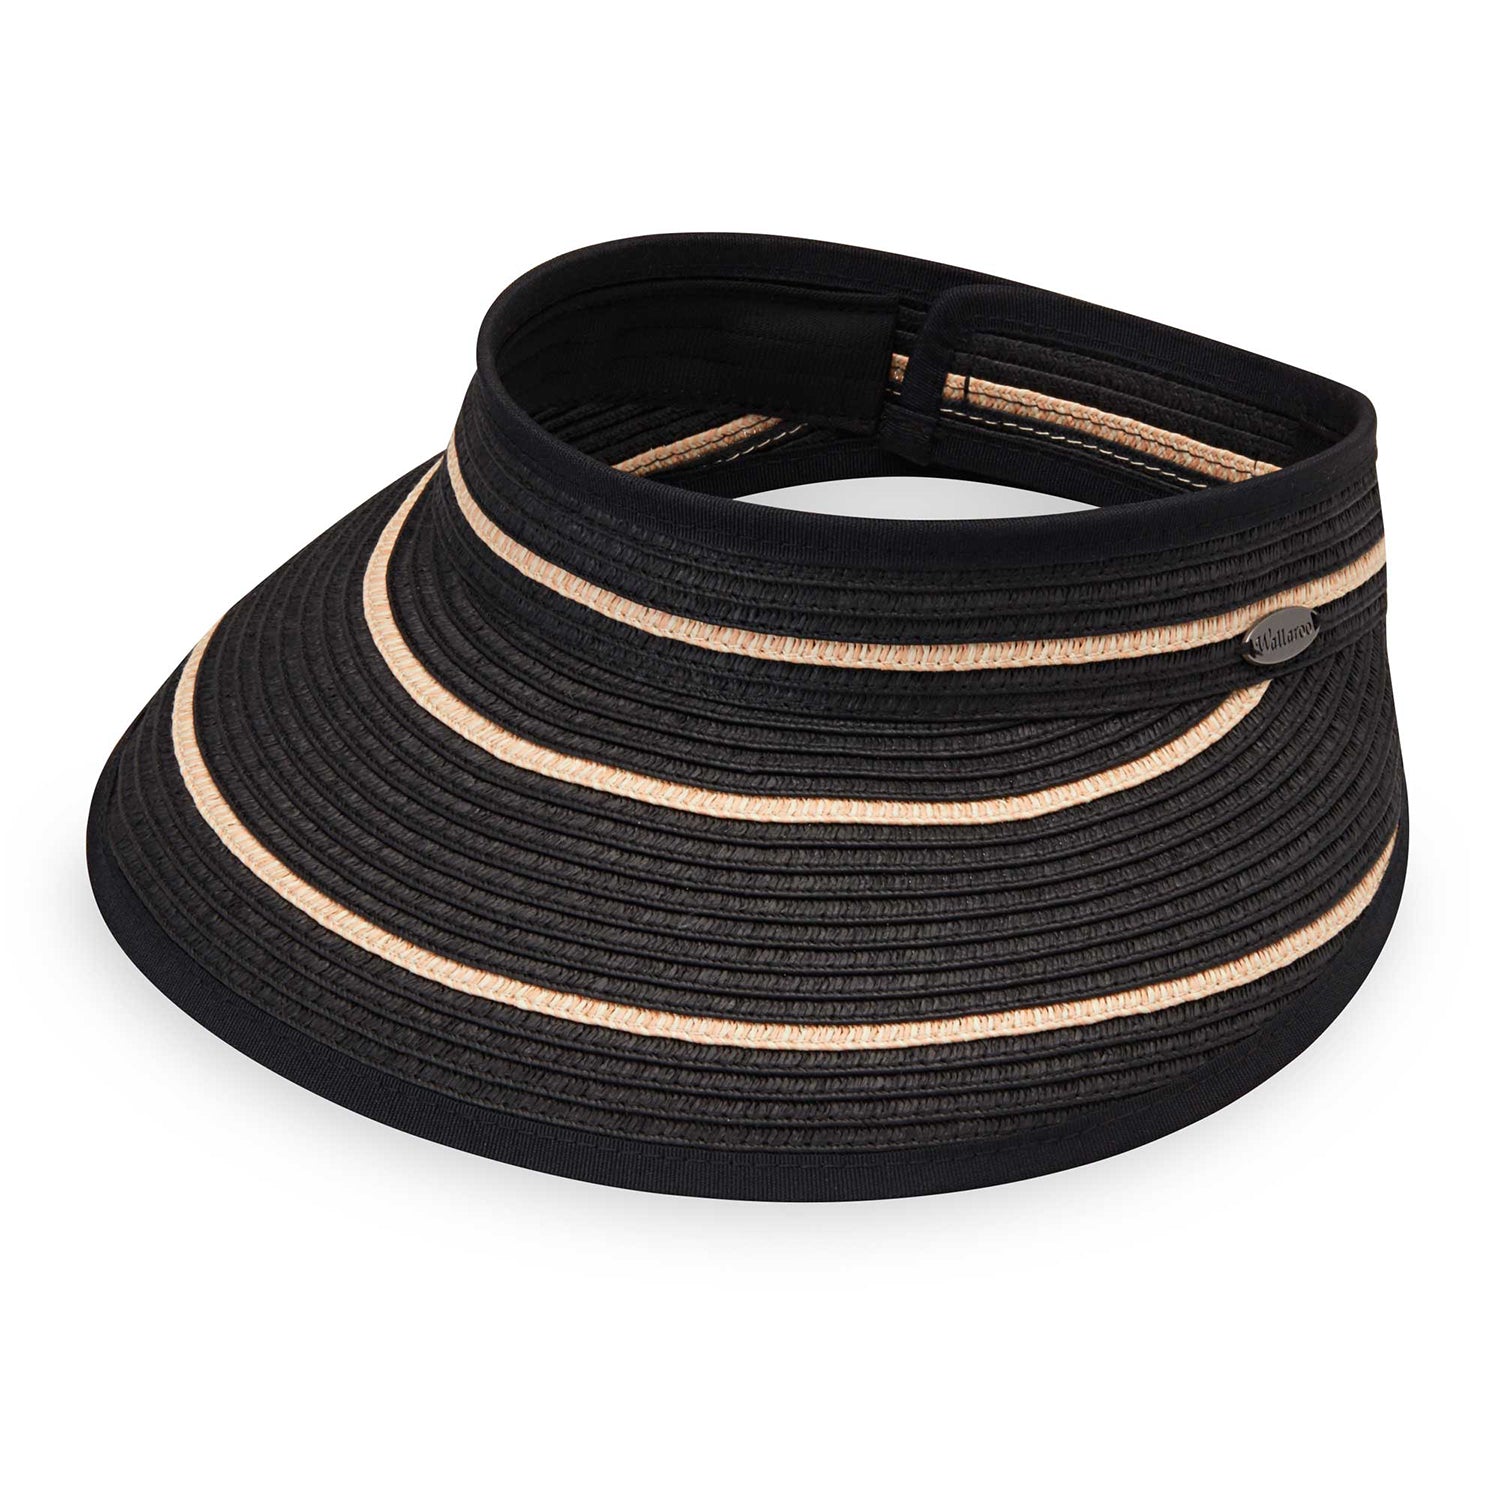 Featuring Petite Savannah sun visor, that features packable and adjustable material